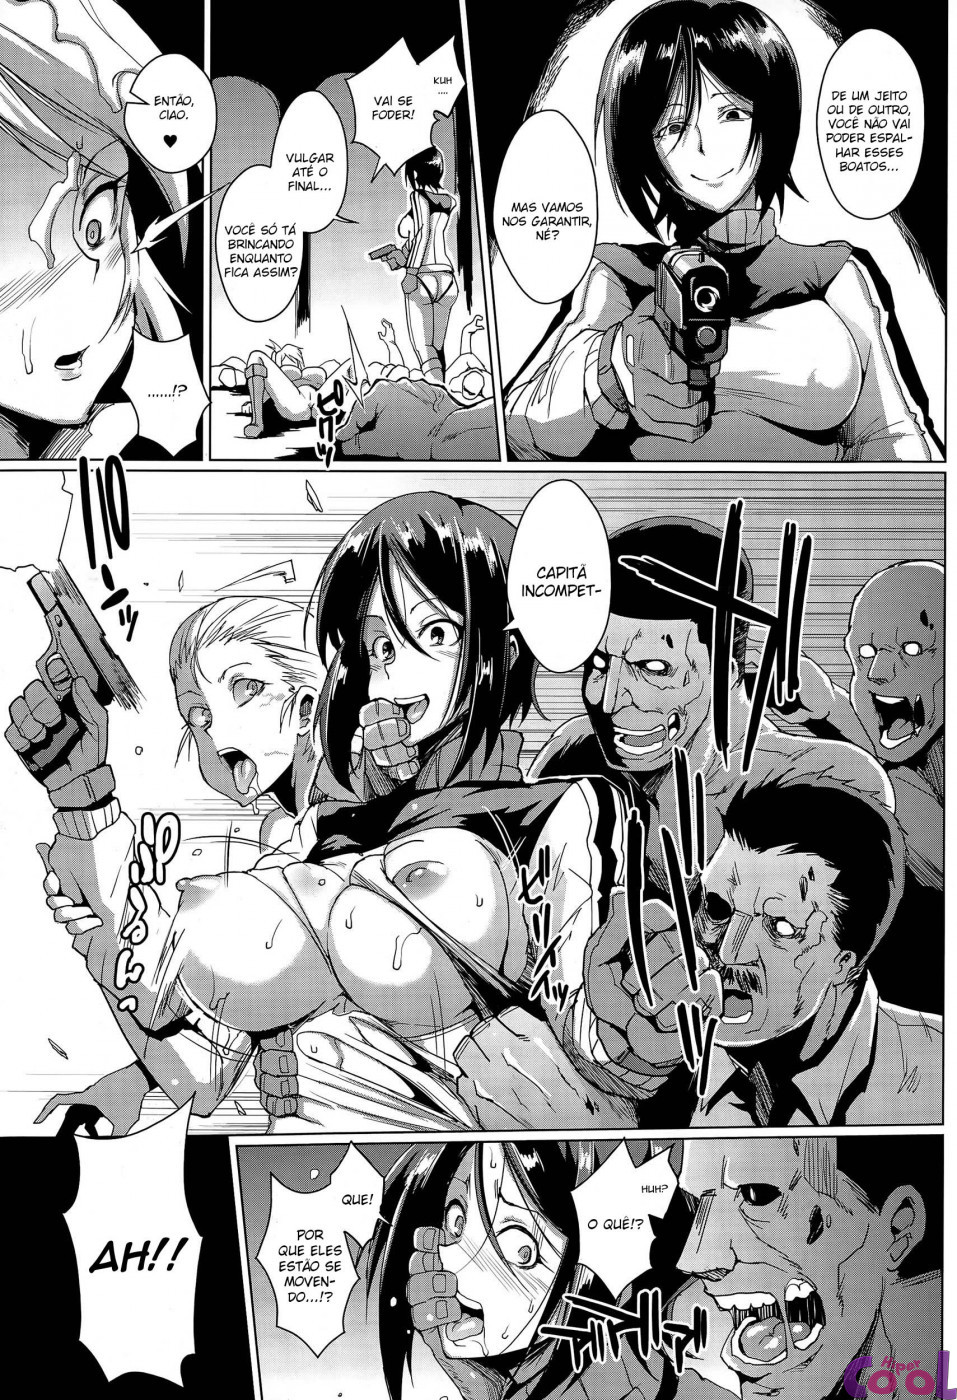 voodoo-squad-chuuhen-chapter-01-page-13.jpg